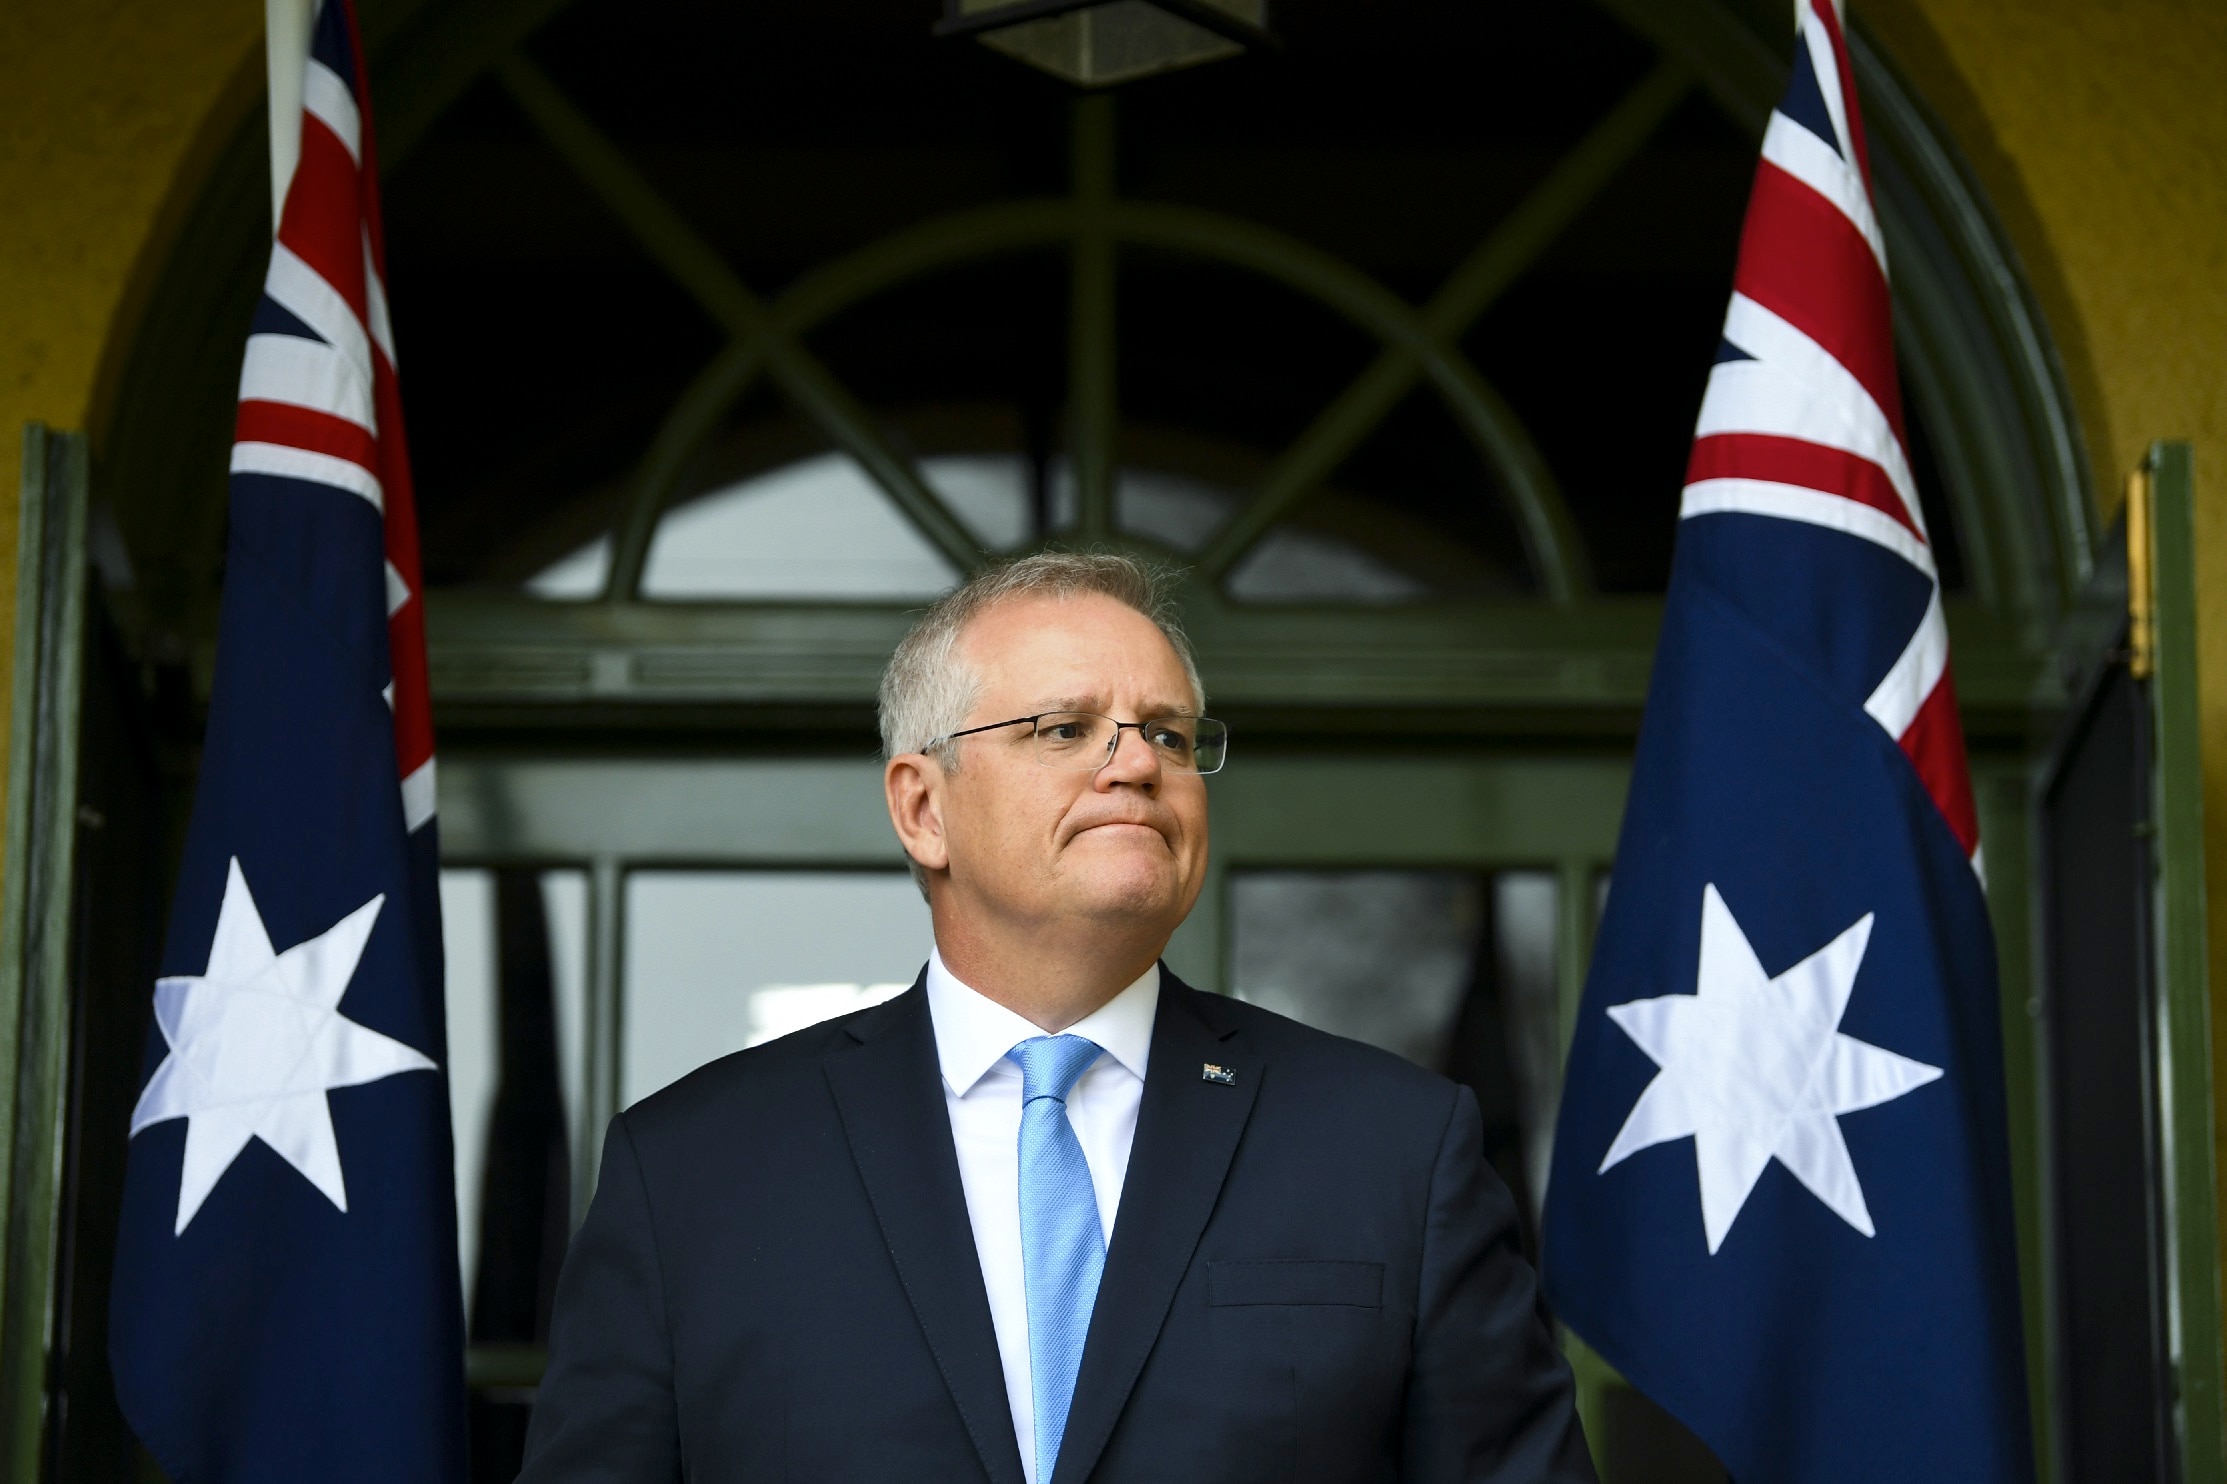 Australian Prime Minister Scott Morrison says while the UN summit in Glasgow is important, he is unlikely to attend the event in-person.